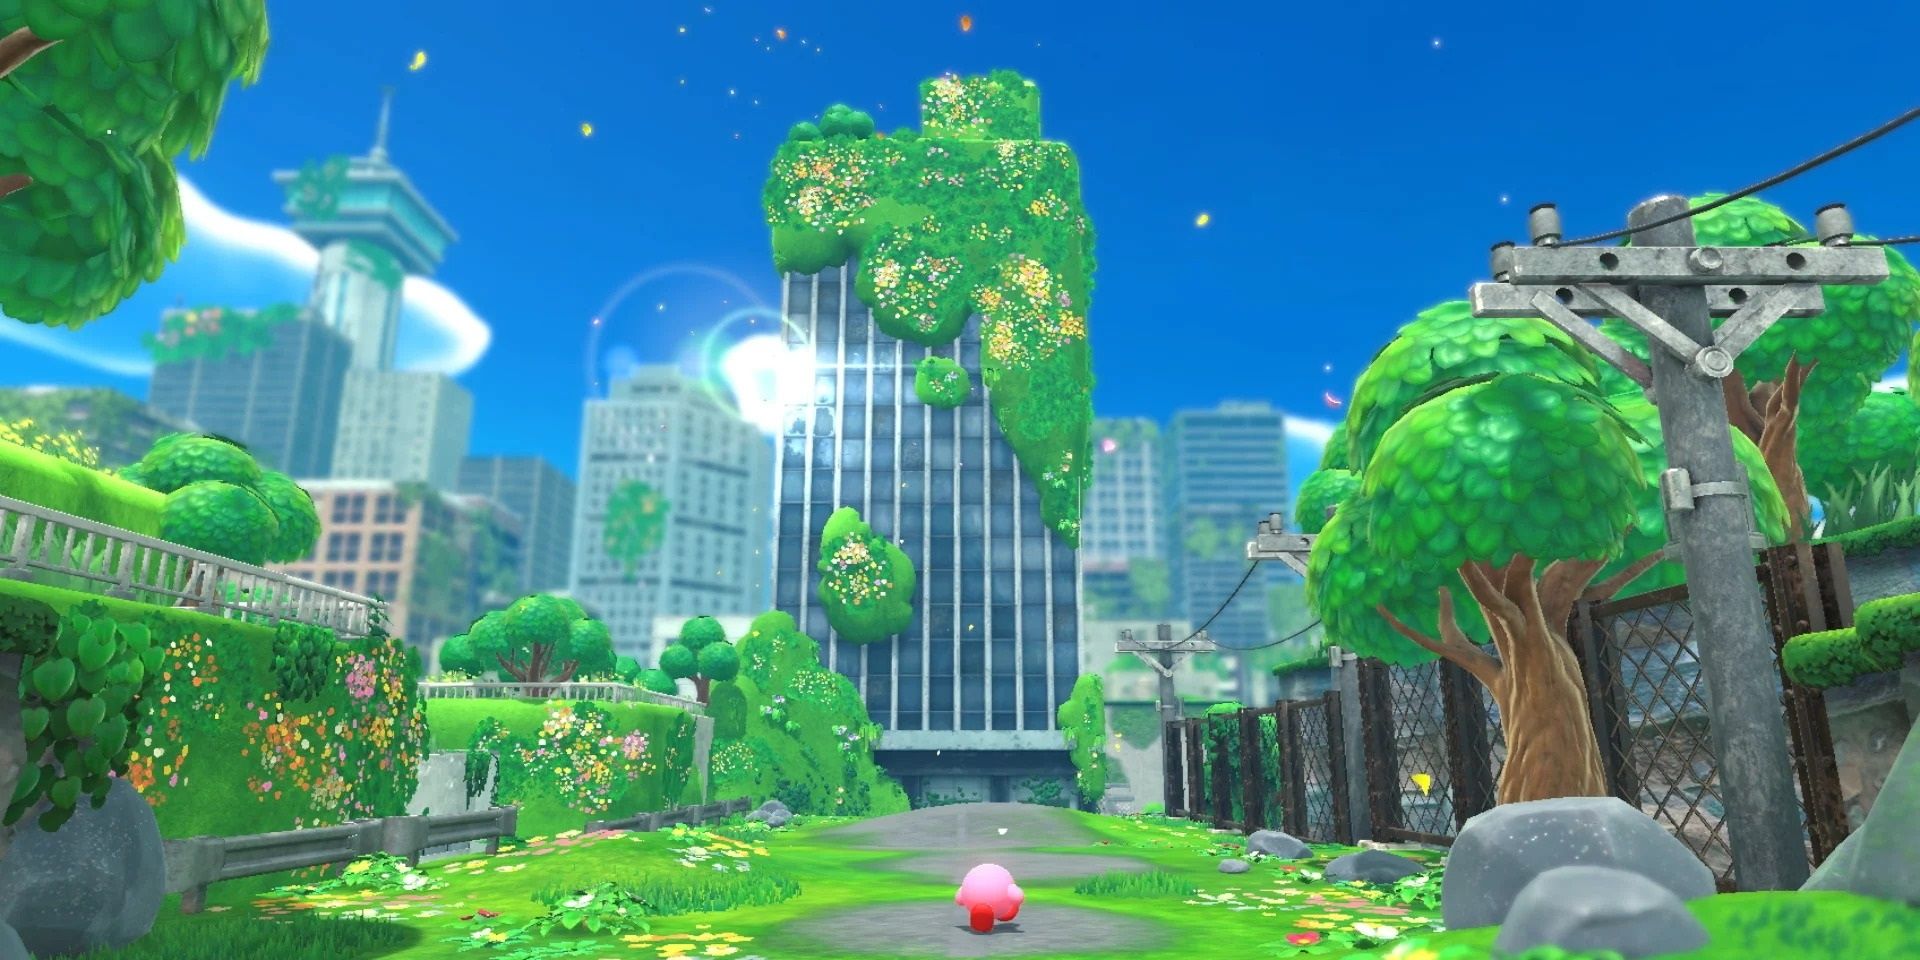 Kirby entering the New World for the first time in Kirby and the Forgotten Land